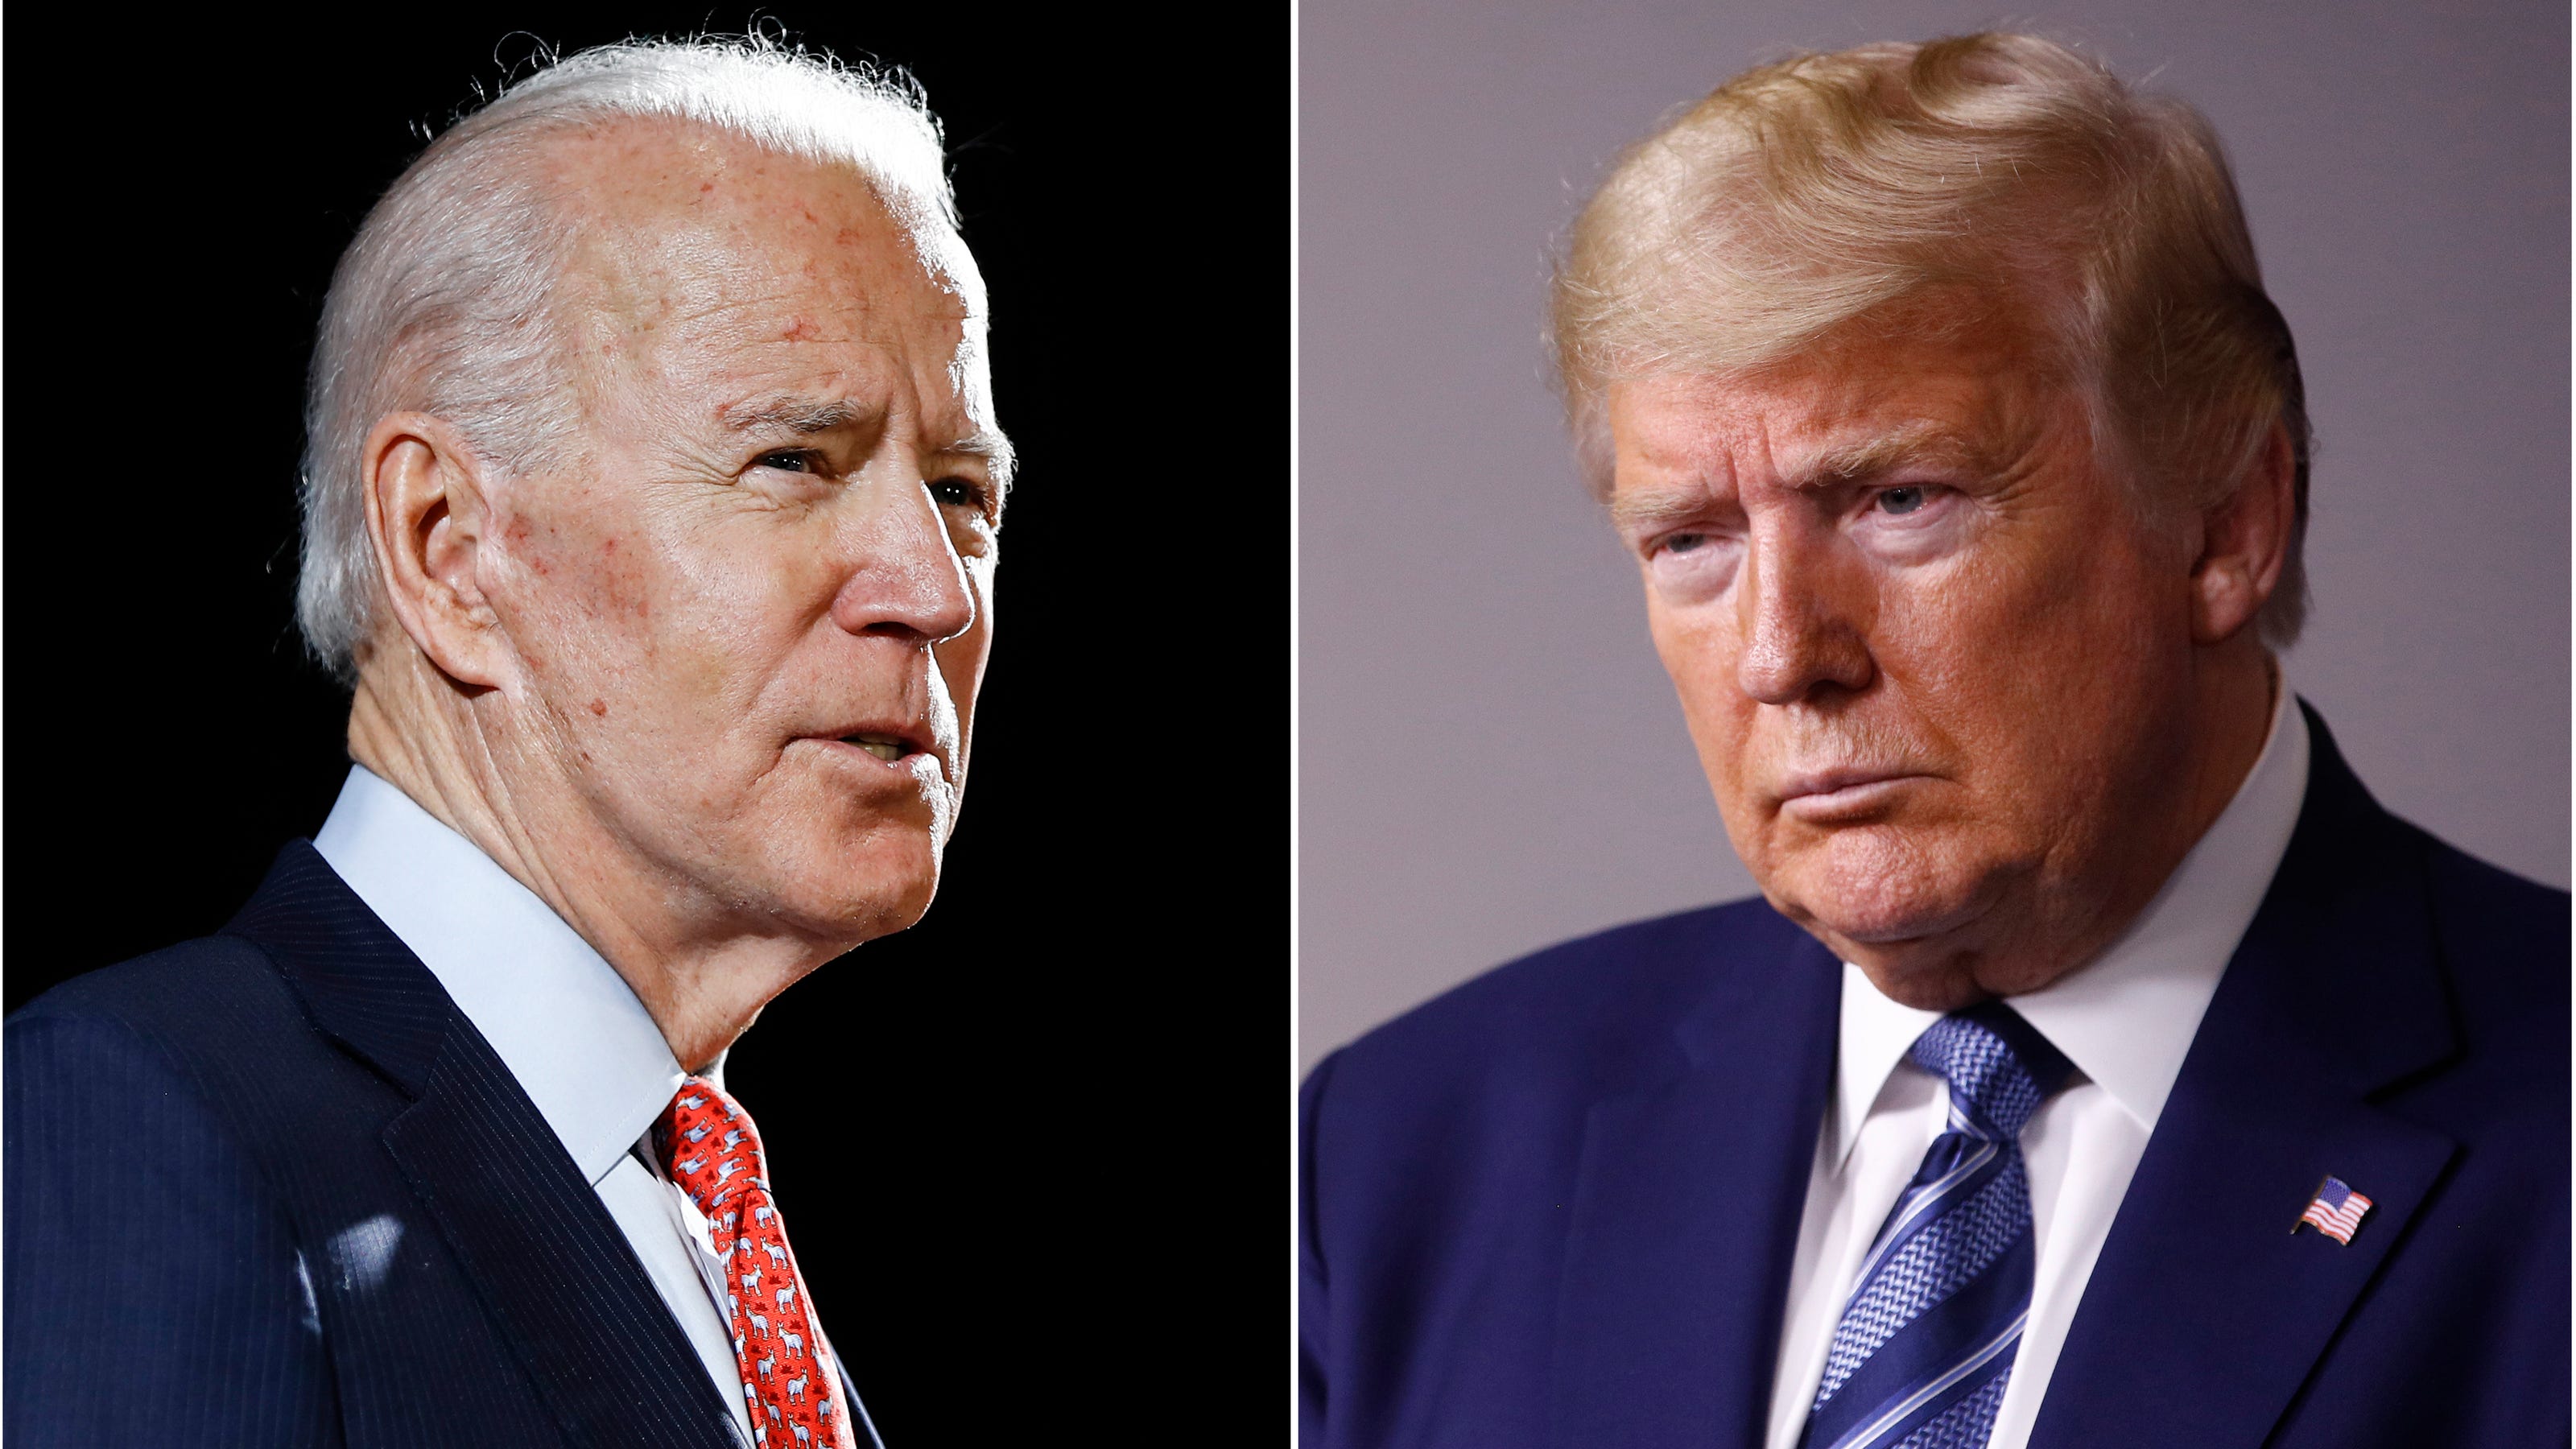 2020 Election: What to know about Joe Biden, Donald Trump's town halls